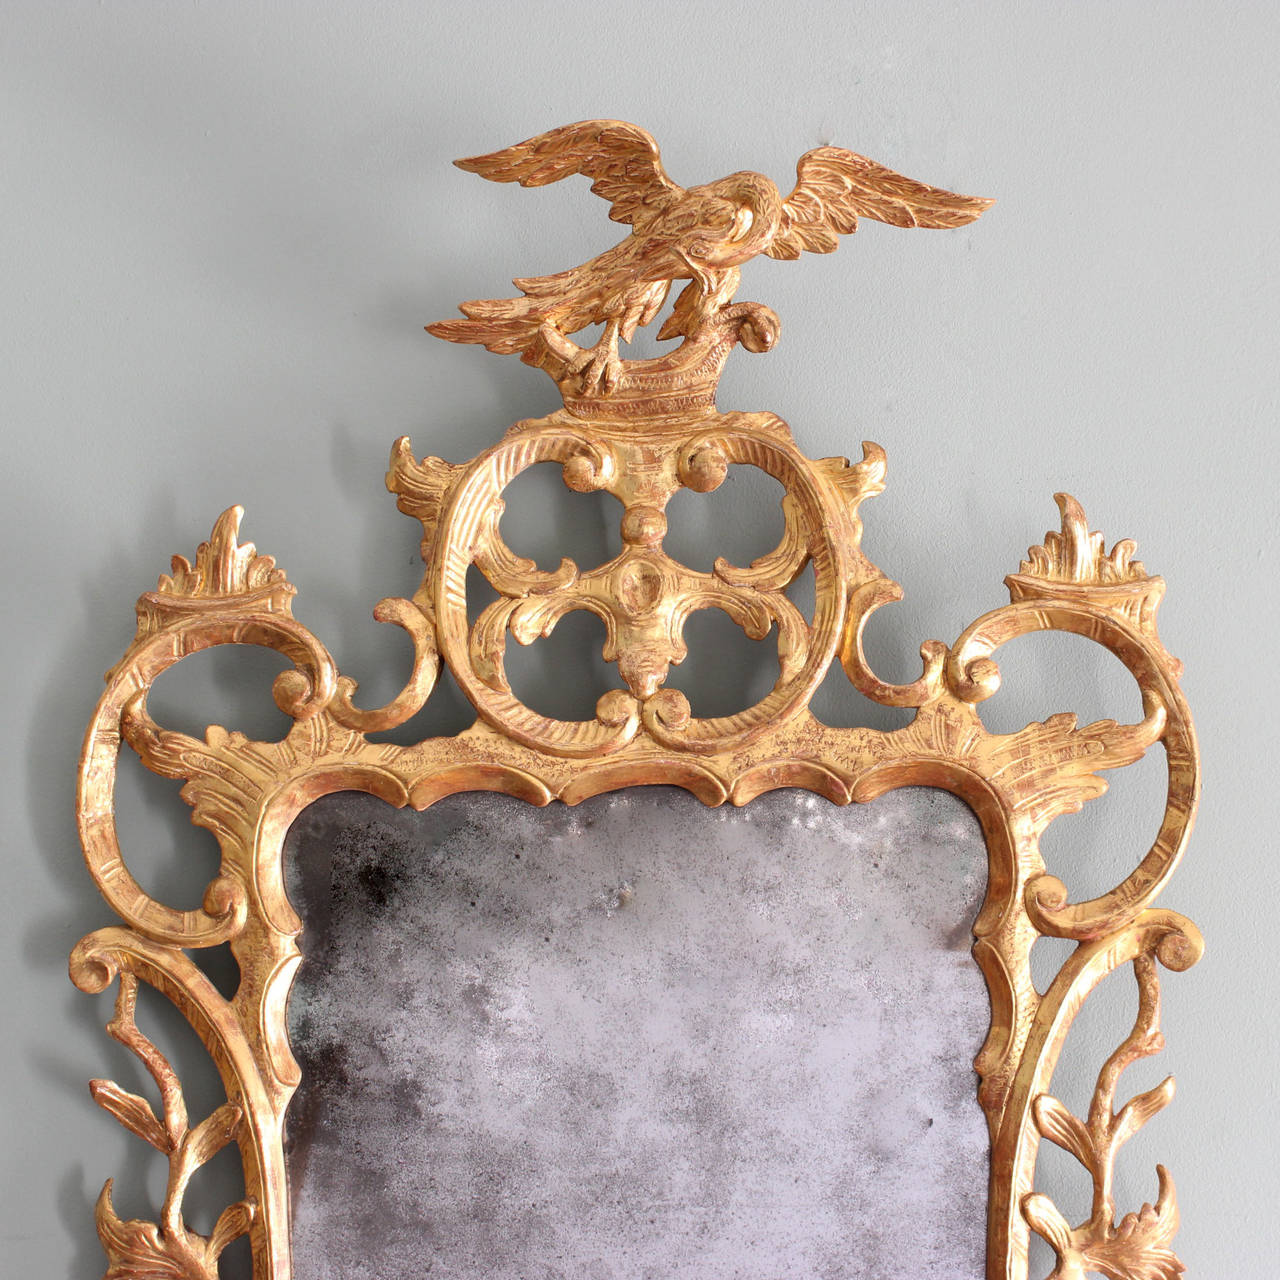 A George III giltwood mirror, circa 1760, the original plate surrounded by frame carved with C-scrolls and foliage, surmounted by Ho-Ho bird cresting. 

Available to view at Brunswick House, London.

Height 121 cm, width 63 cm.